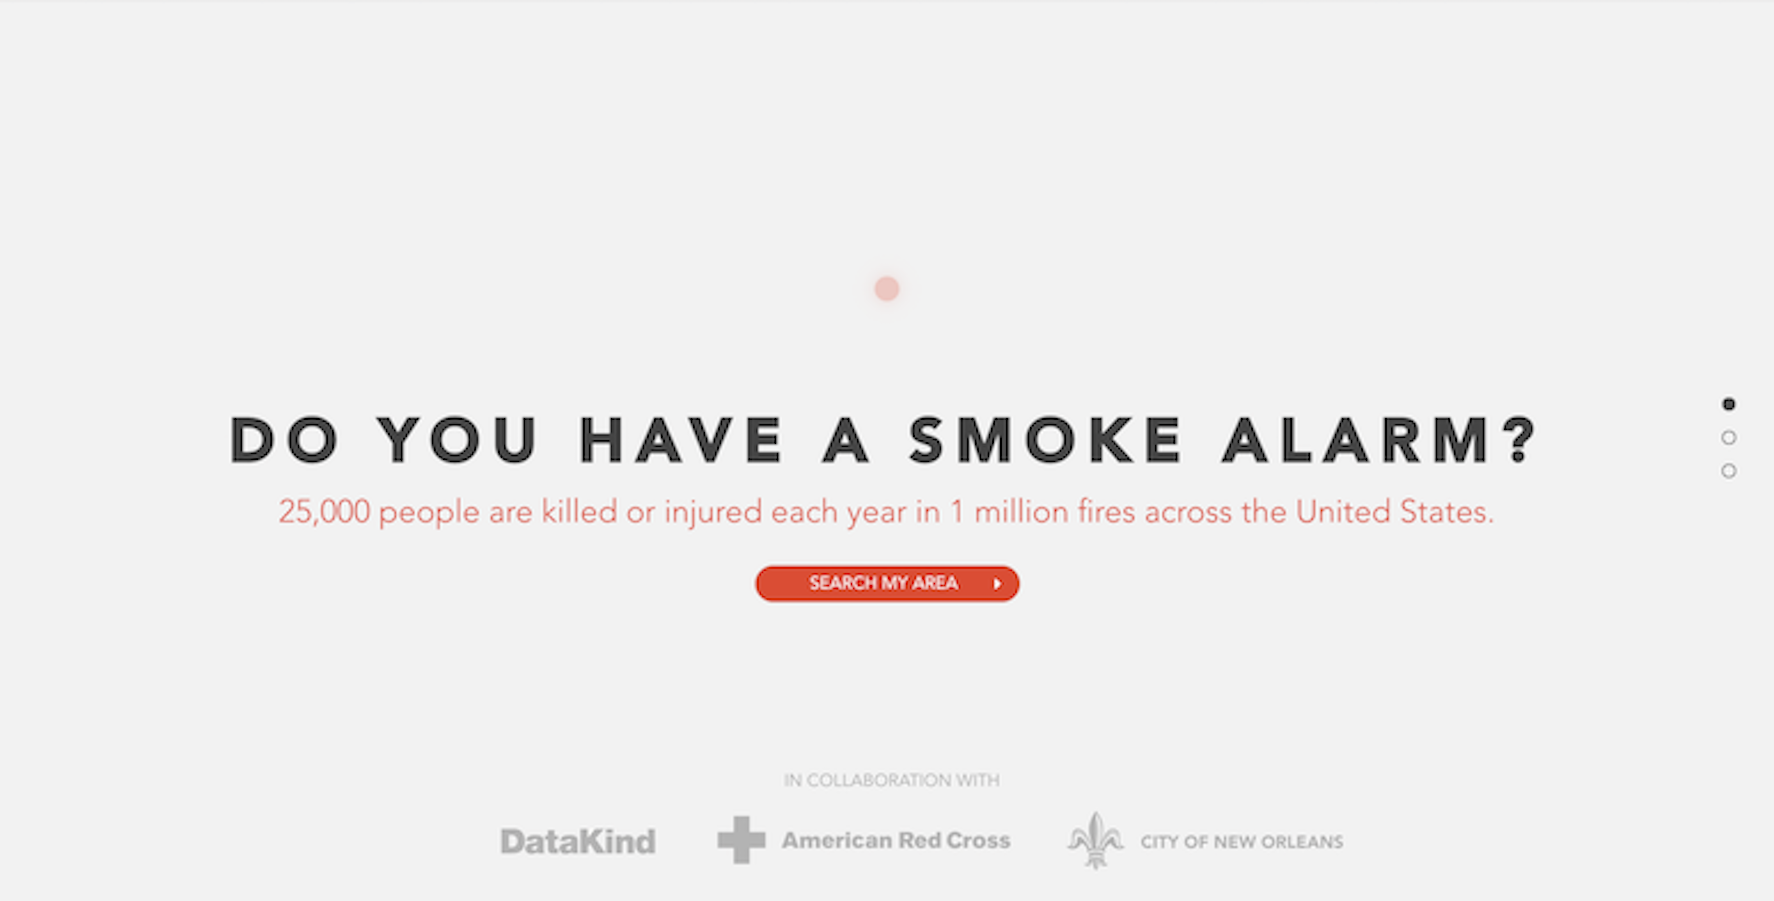 An image of a screen reading the phrase "Do You Have A Smoke Alarm?" in black capital letters. There is red text below it saying "25,000 people are killed or injured each year in 1 million fires across the United States". There is a red button underneath that which says "Search My Area". And grey text at the bottom that says in collaboration with and then the logos for DataKind, American Red Cross, City of New Orleans. 